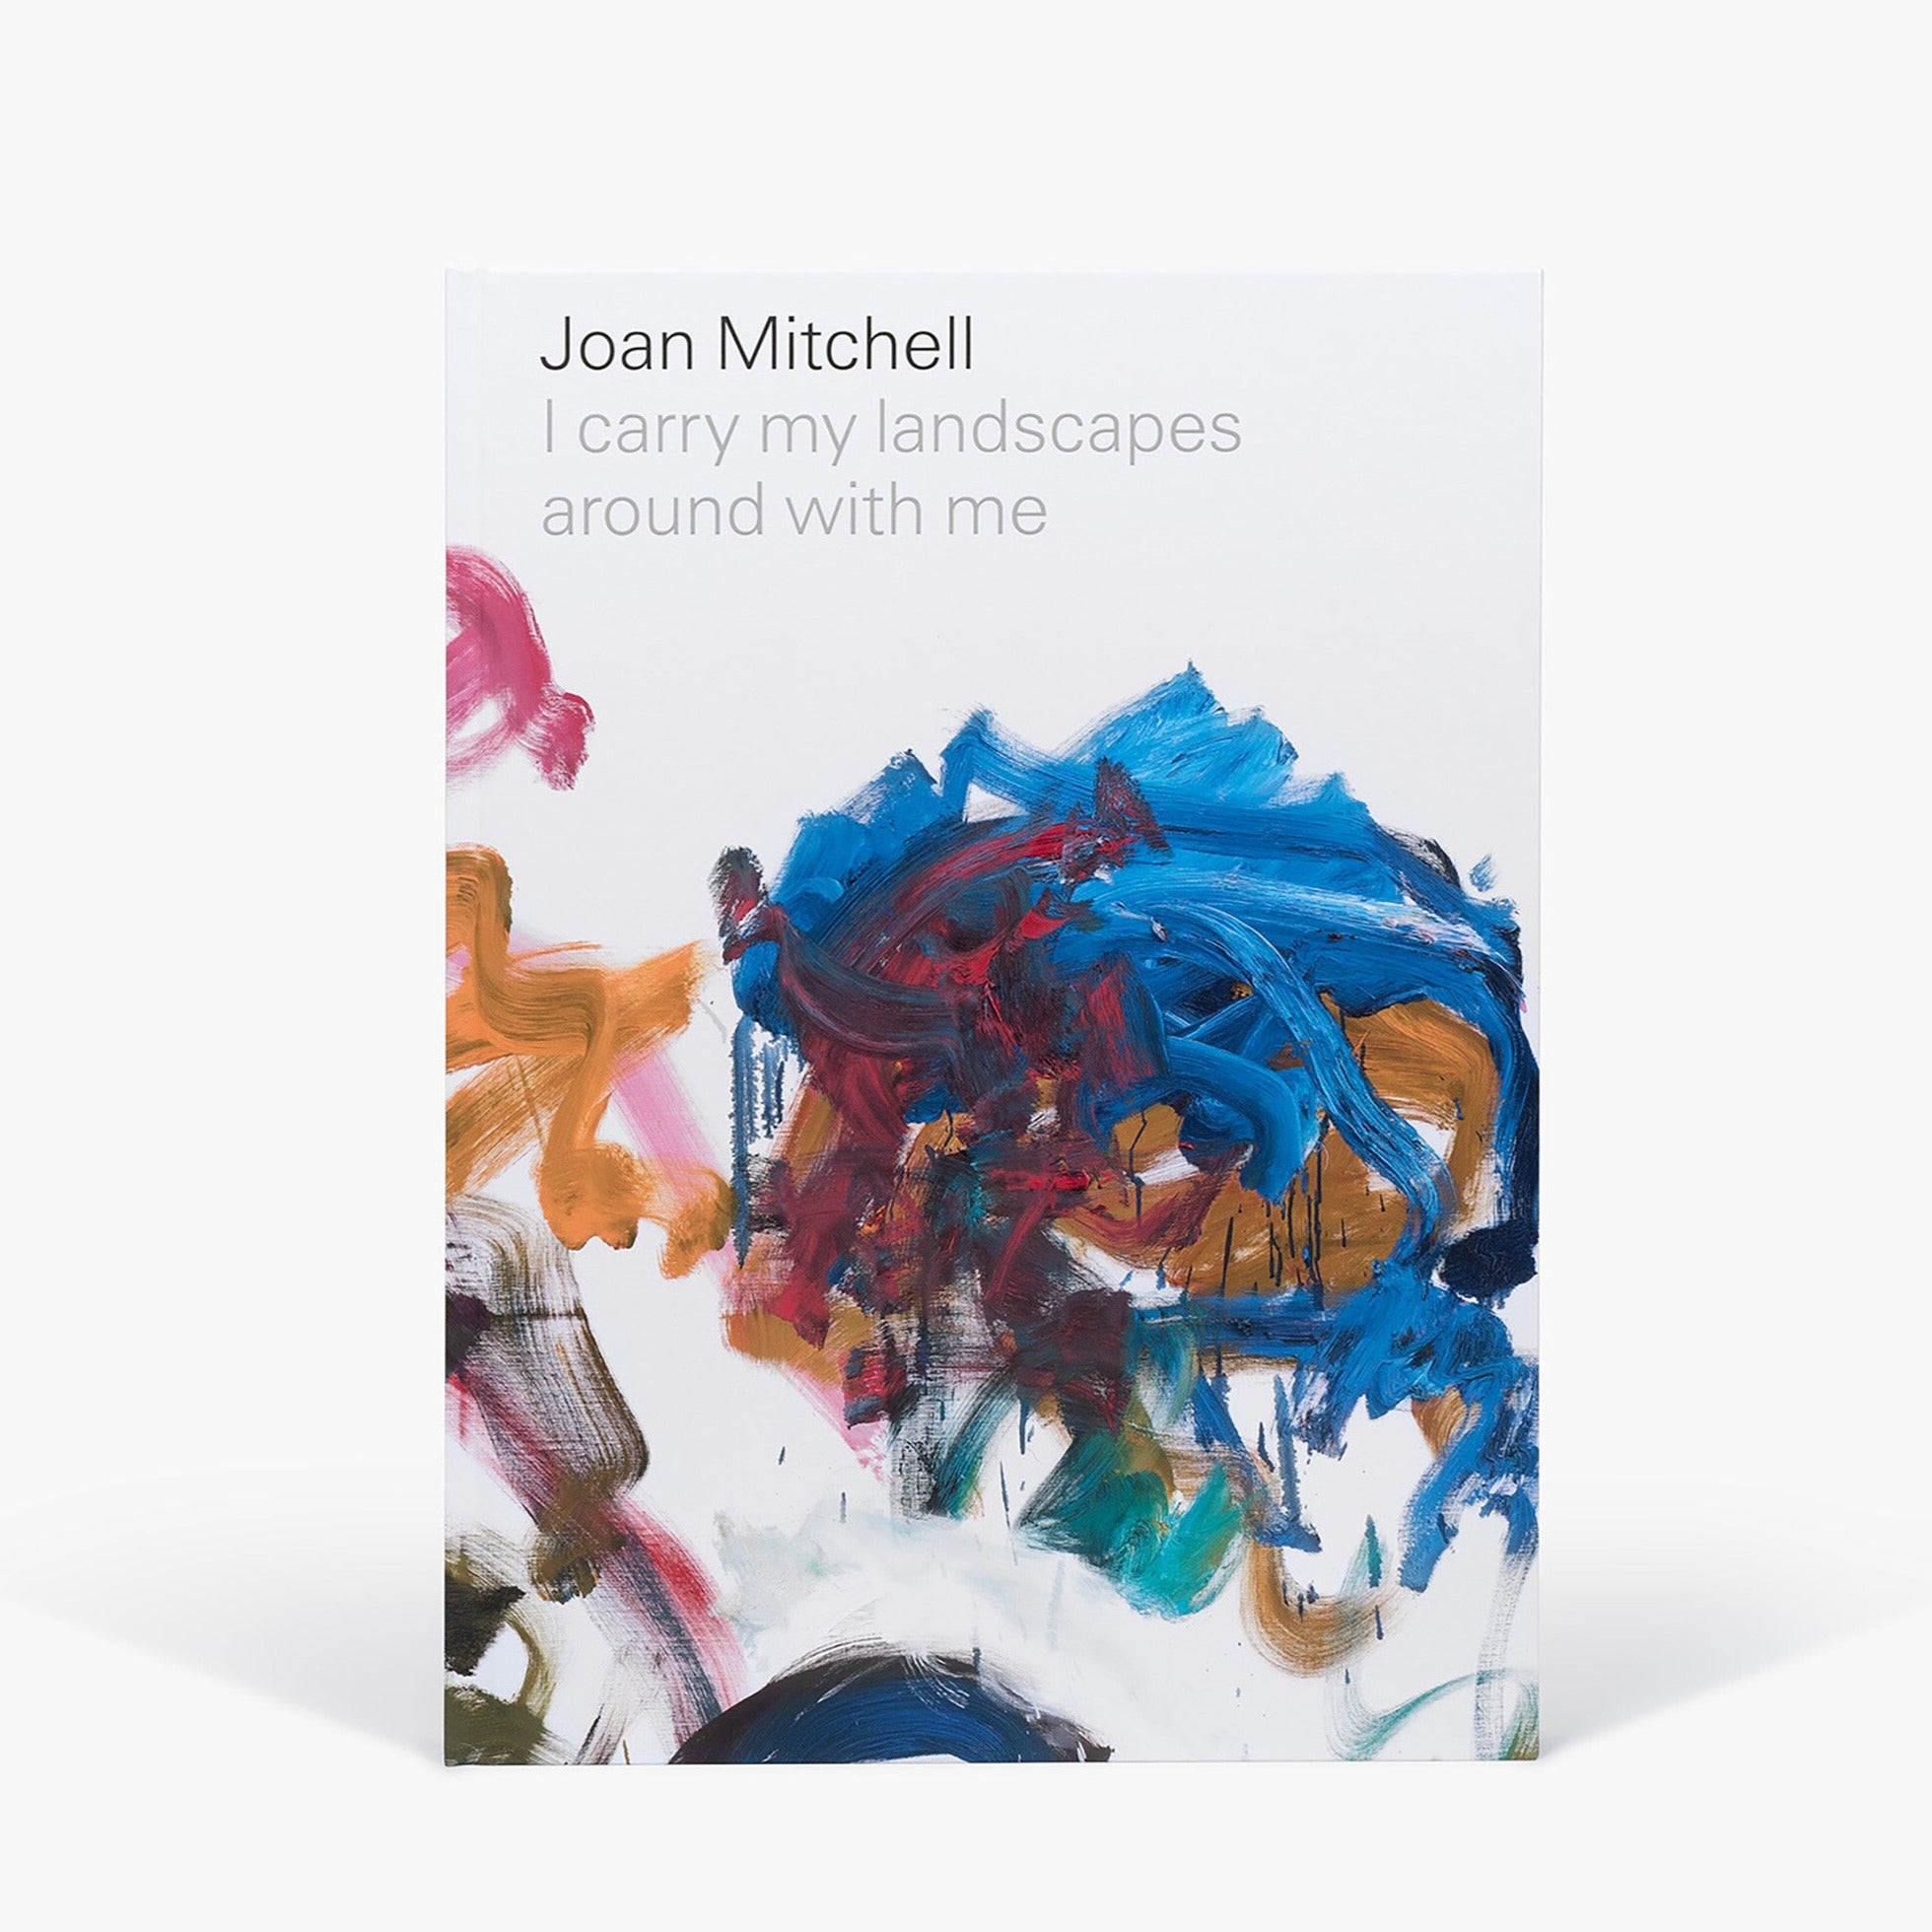 Cover of Joan Mitchell's I carry my landscapes around with me book, featuring a detailed image of an abstract paint work by the artist.